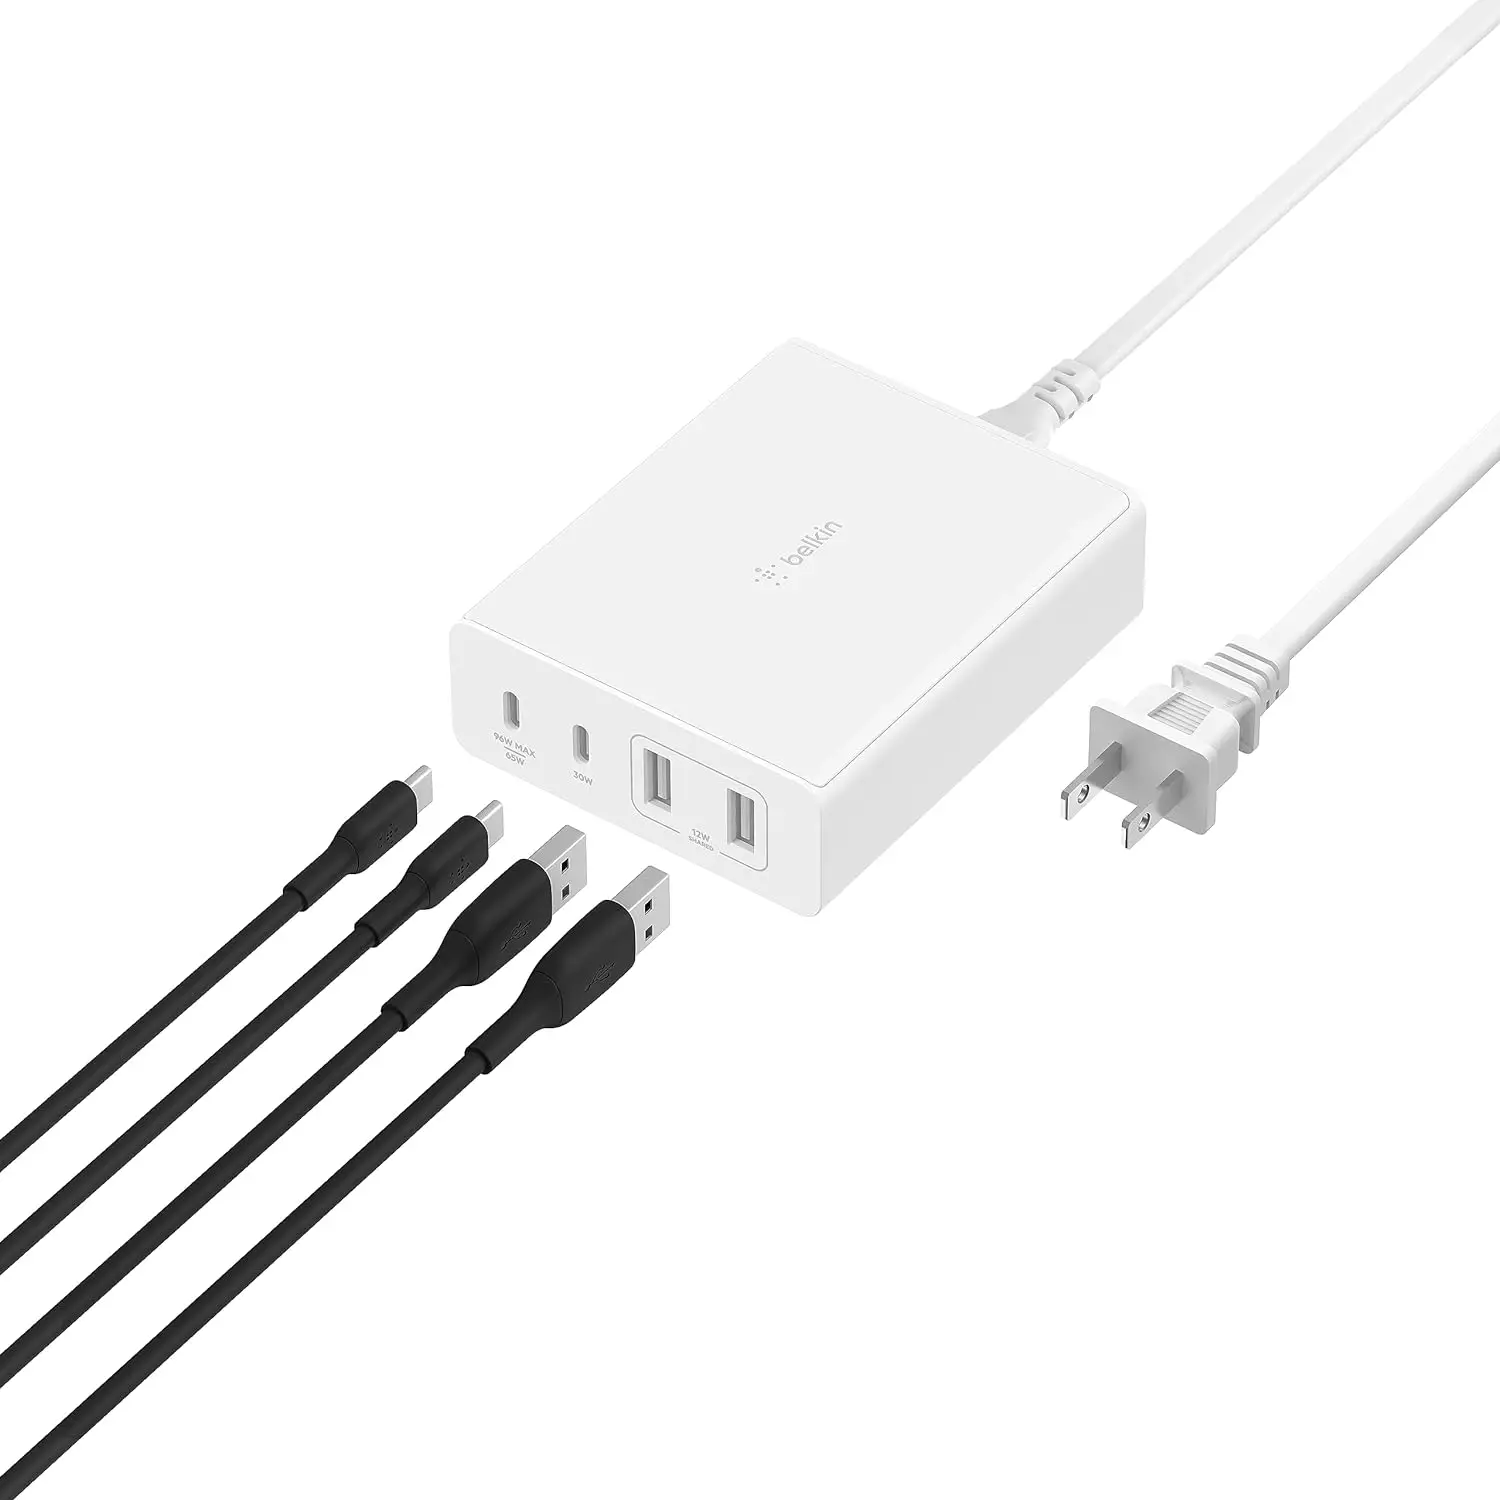 Belkin BoostCharge Pro 108W 4-Port GaN Charger, Multi-Port Desktop Charger Block w/ USB-C PD Fast Charge  USB-A Ports for Apple MacBook, iPhone, iPad, Samsung Galaxy, Google Pixel,  More - White